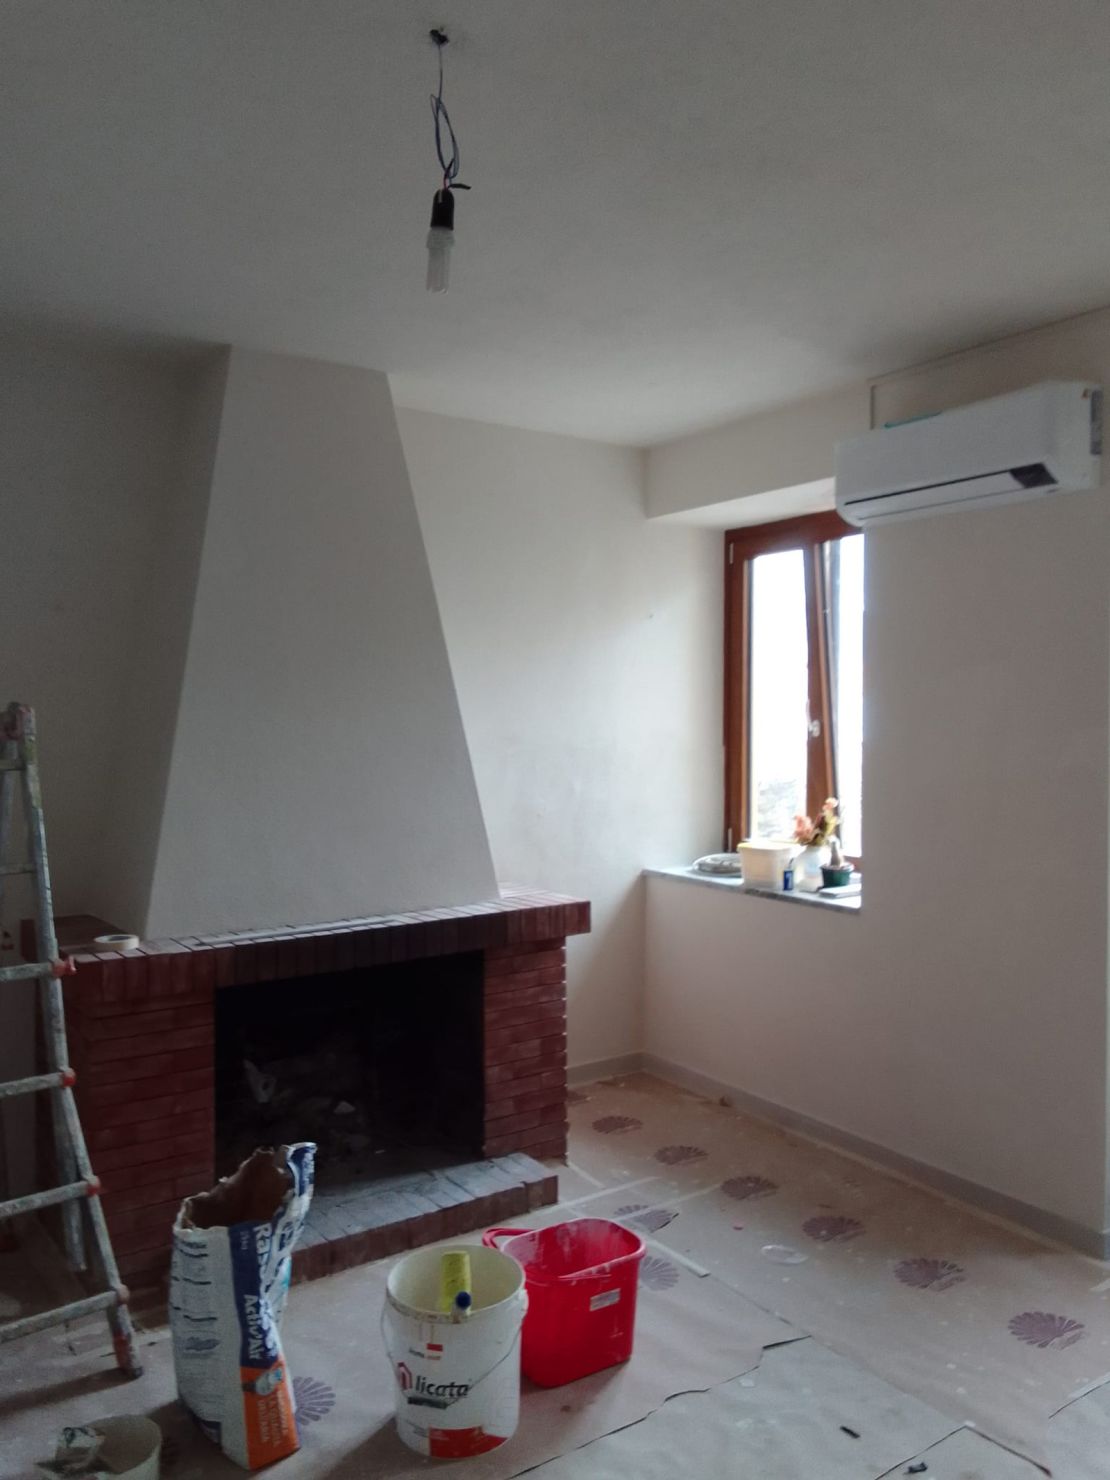 They've spent around 50,000 euros on renovations to the two-bedroom home. But the work has taken longer to complete than they expected.